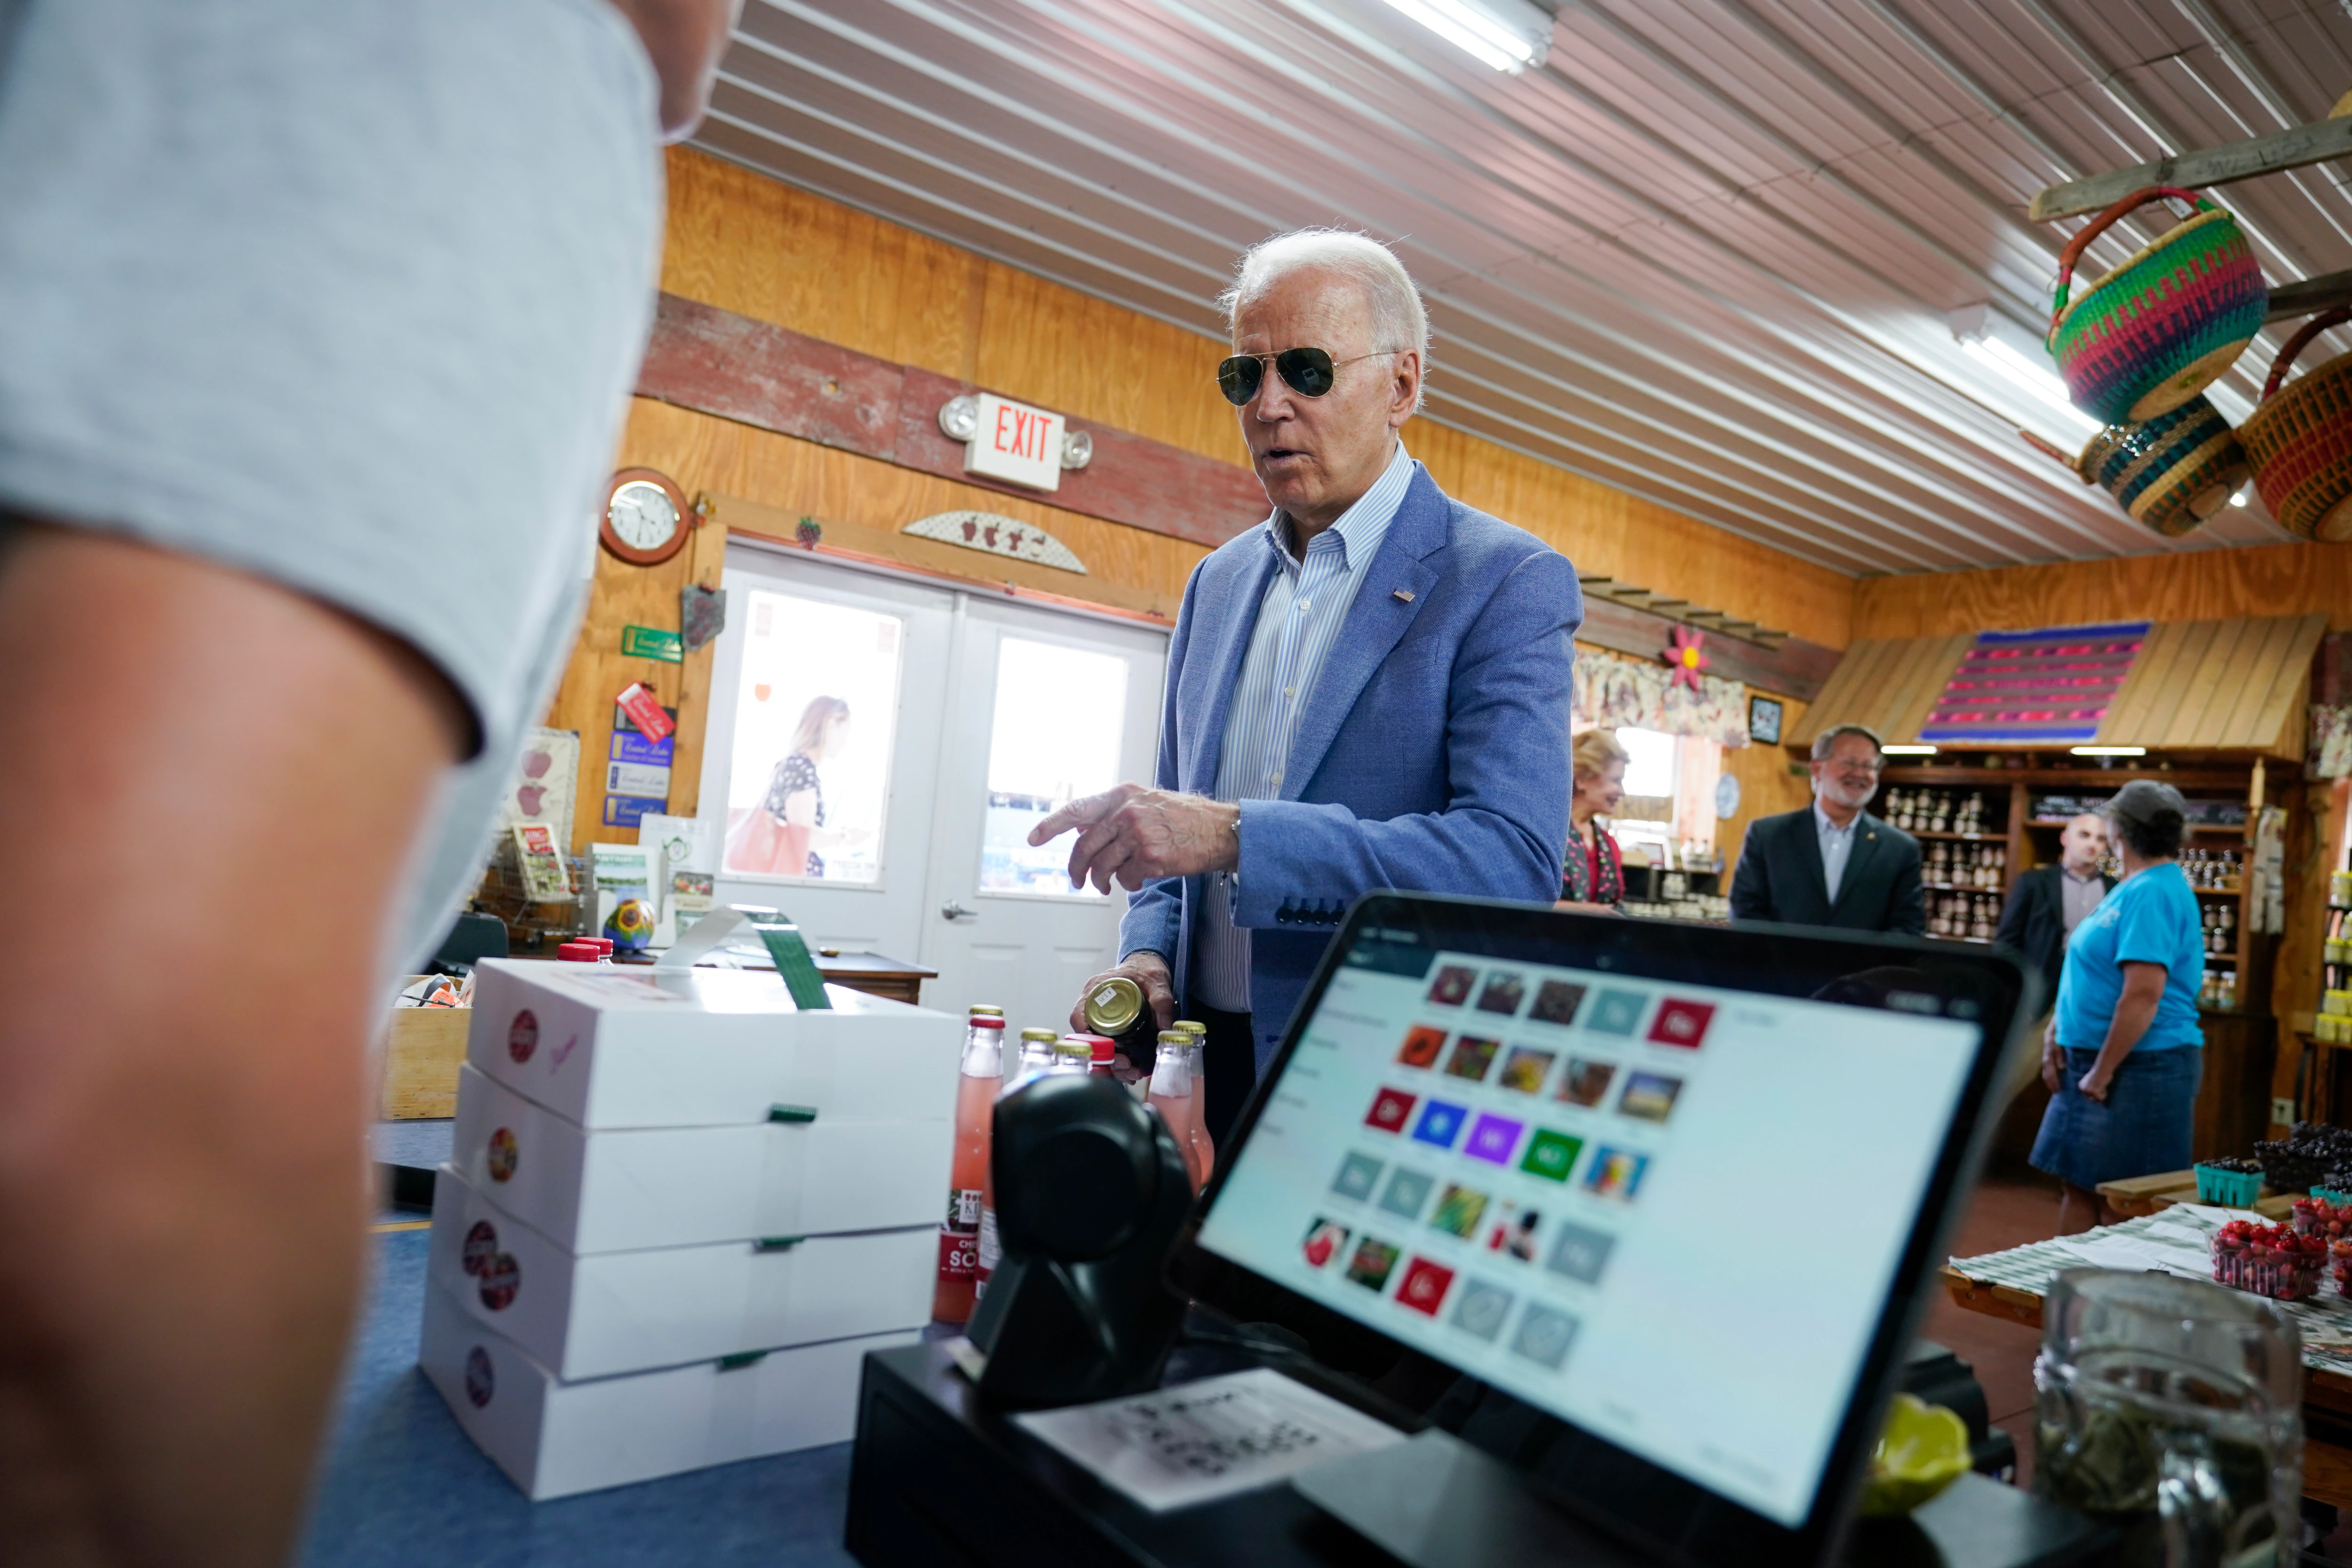 Biden Goes for Cherries Not Speeches on Campaign-style Michigan Trip | Voice of America